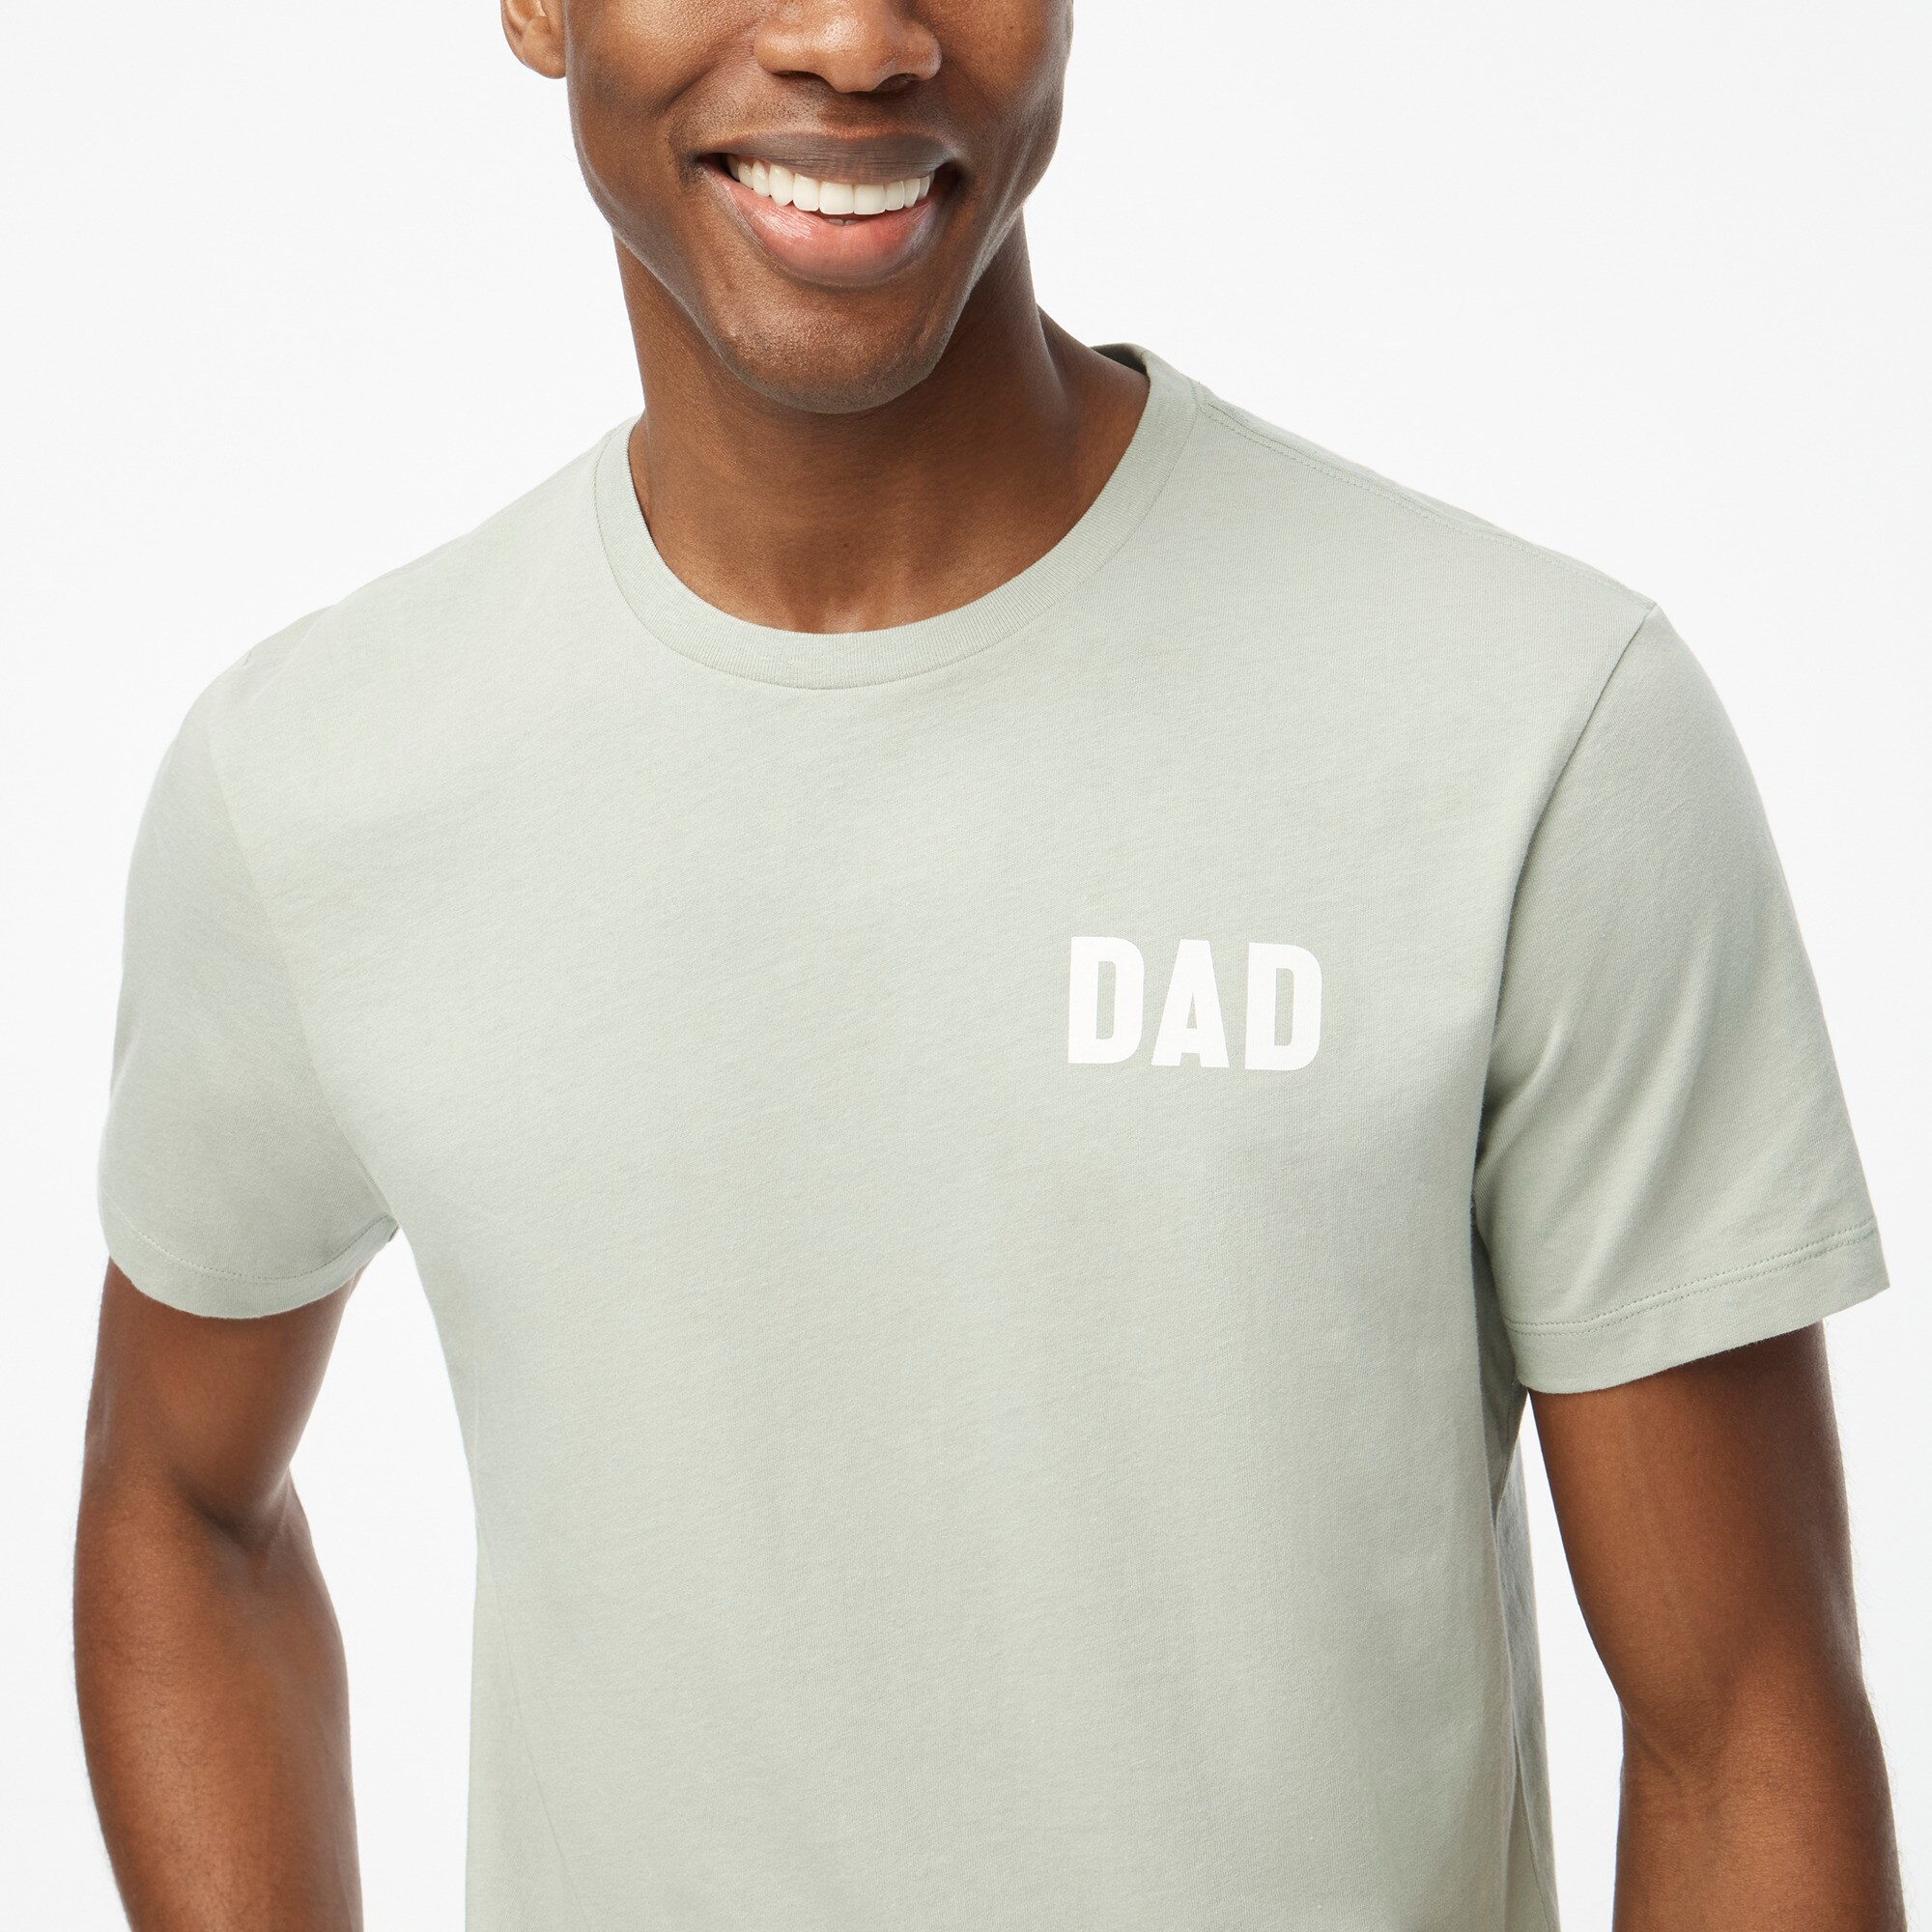 mens Dad graphic tee